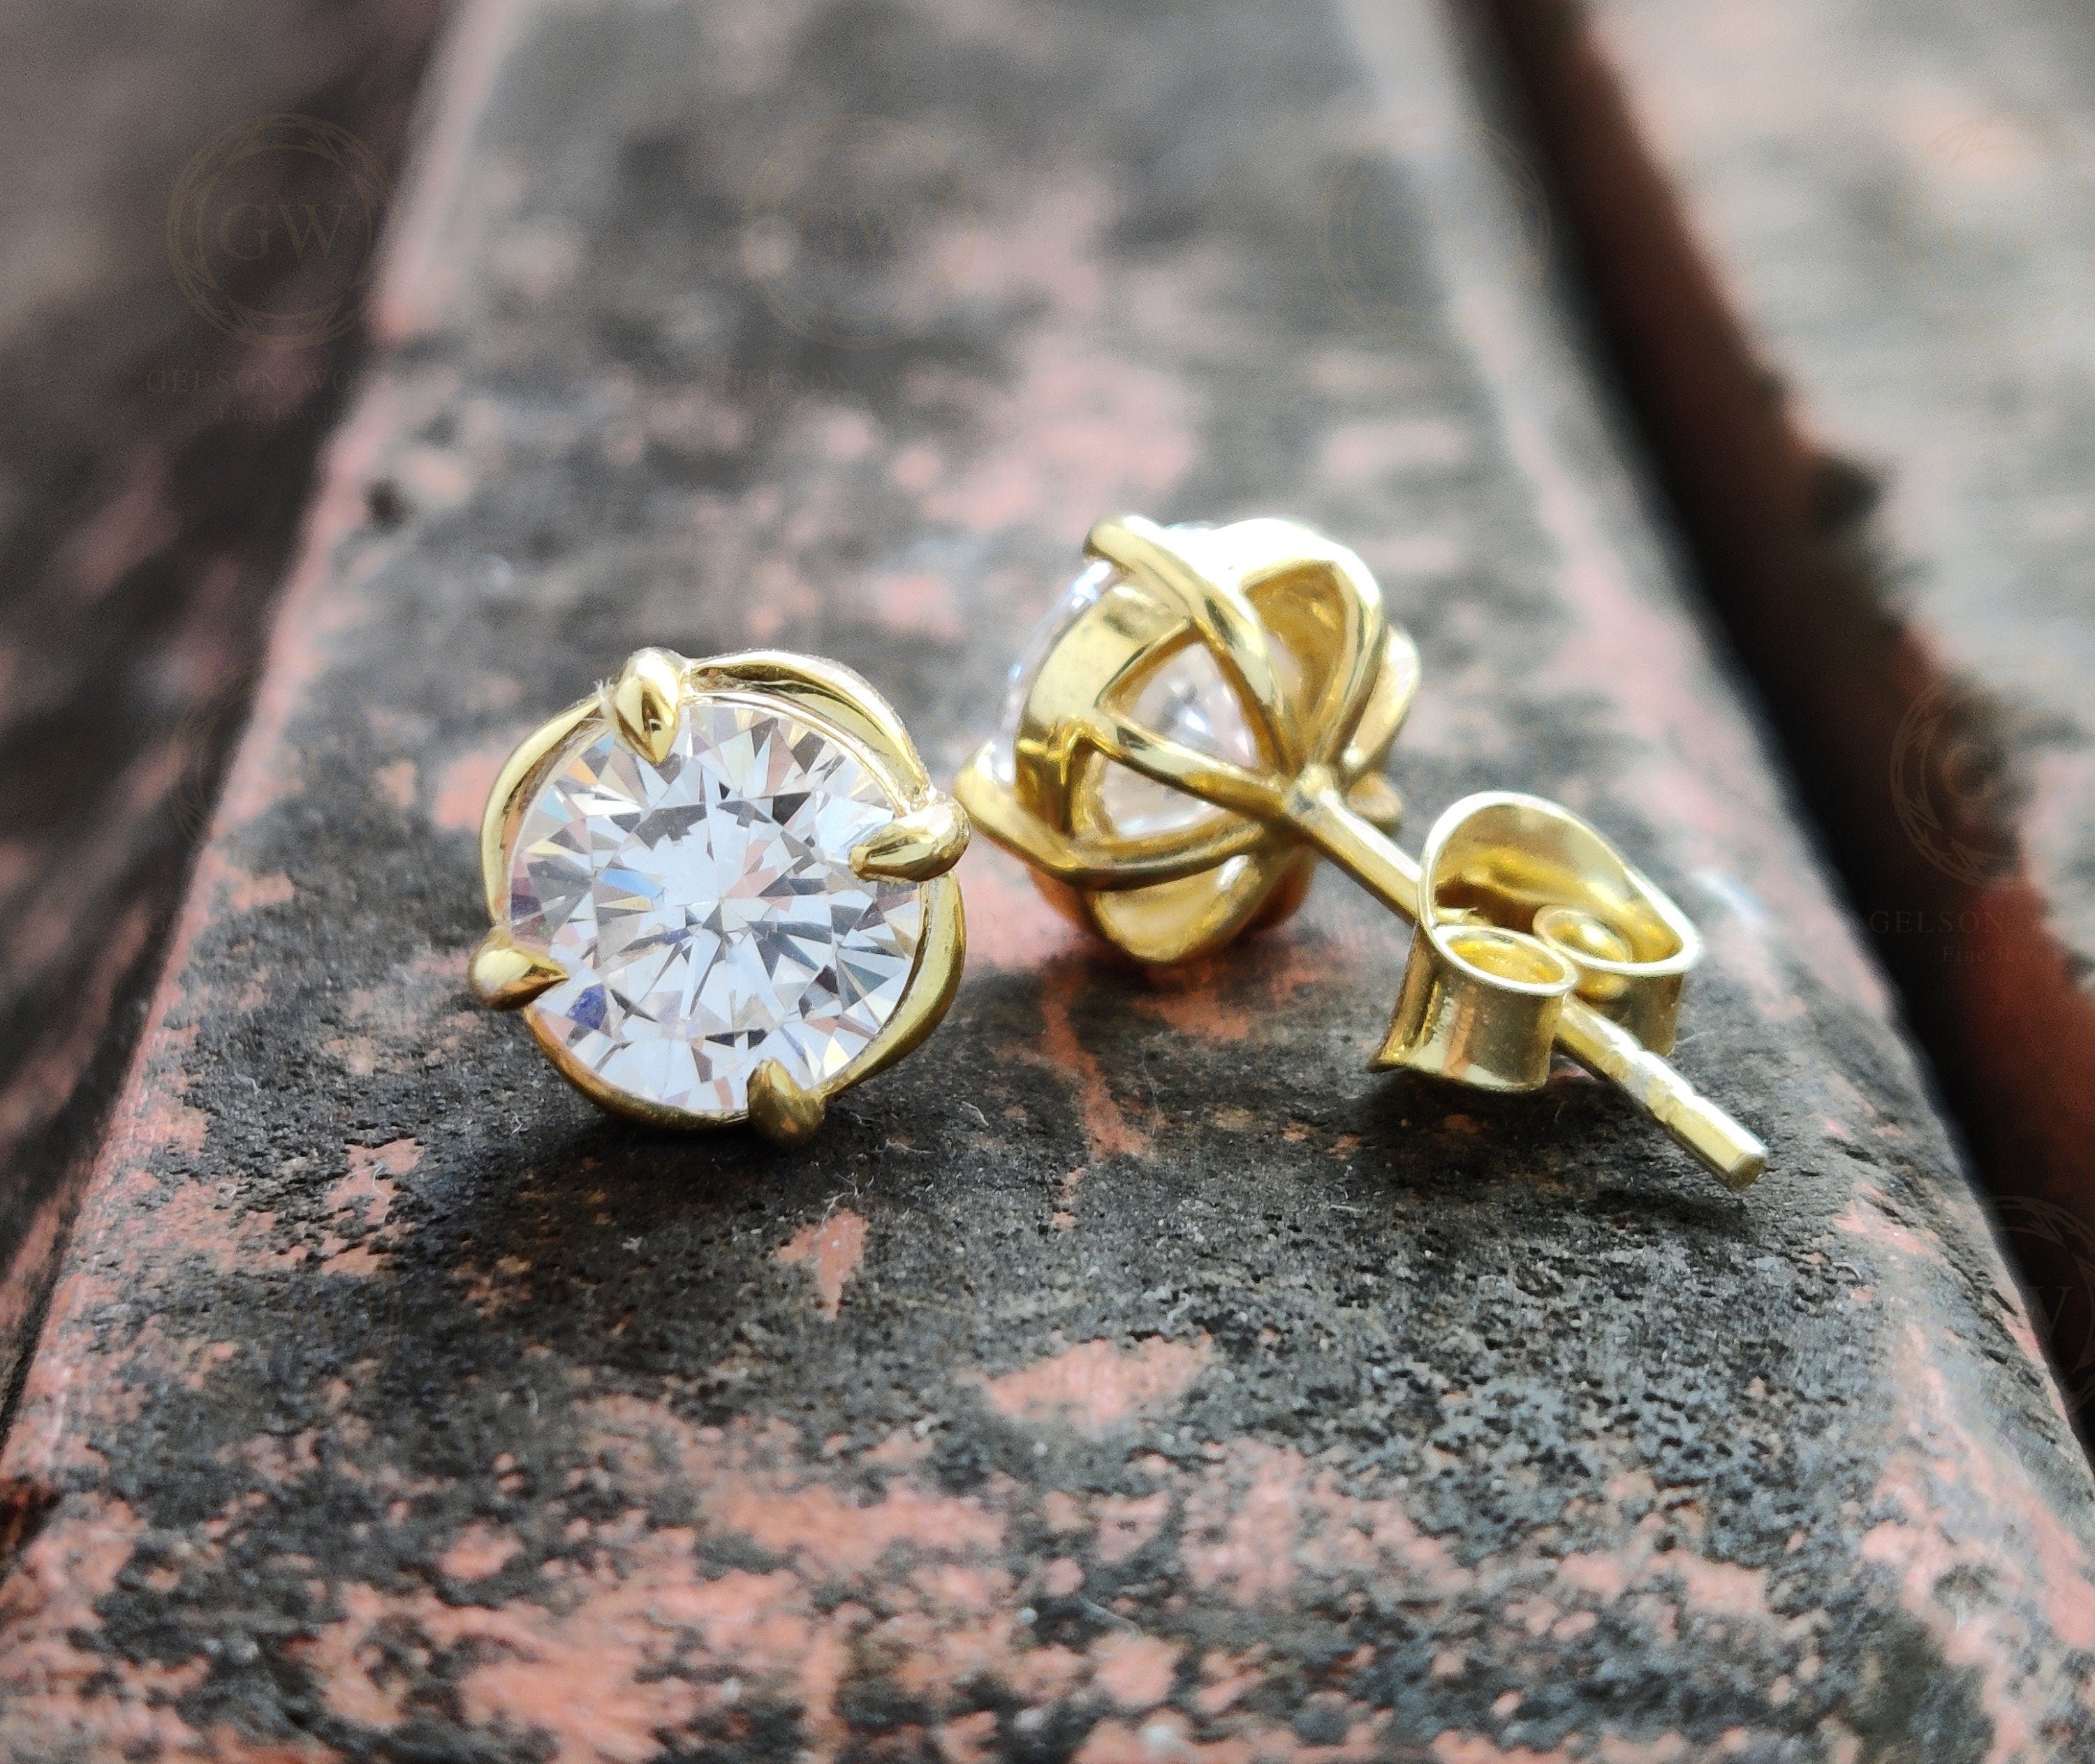 Silver and Solid Gold Solitaire Stud Earrings / Moissanite Earrings / Round Diamond Stud Earrings / Women Earring / Unique Earring design